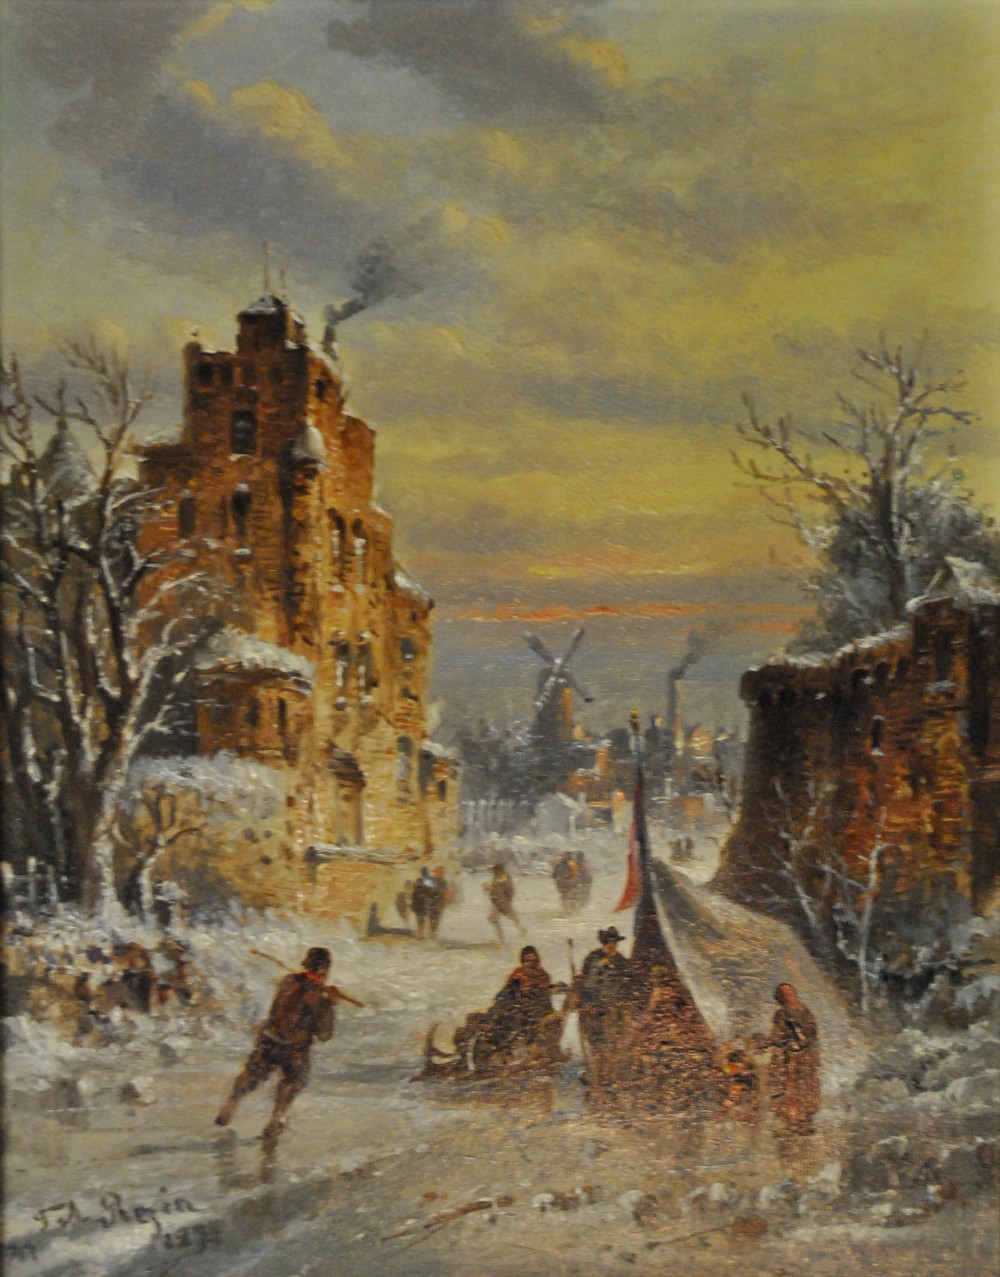 Felice A. Rezia (act. 1857-1907) - A pair of Continental frozen river town scenes with figures